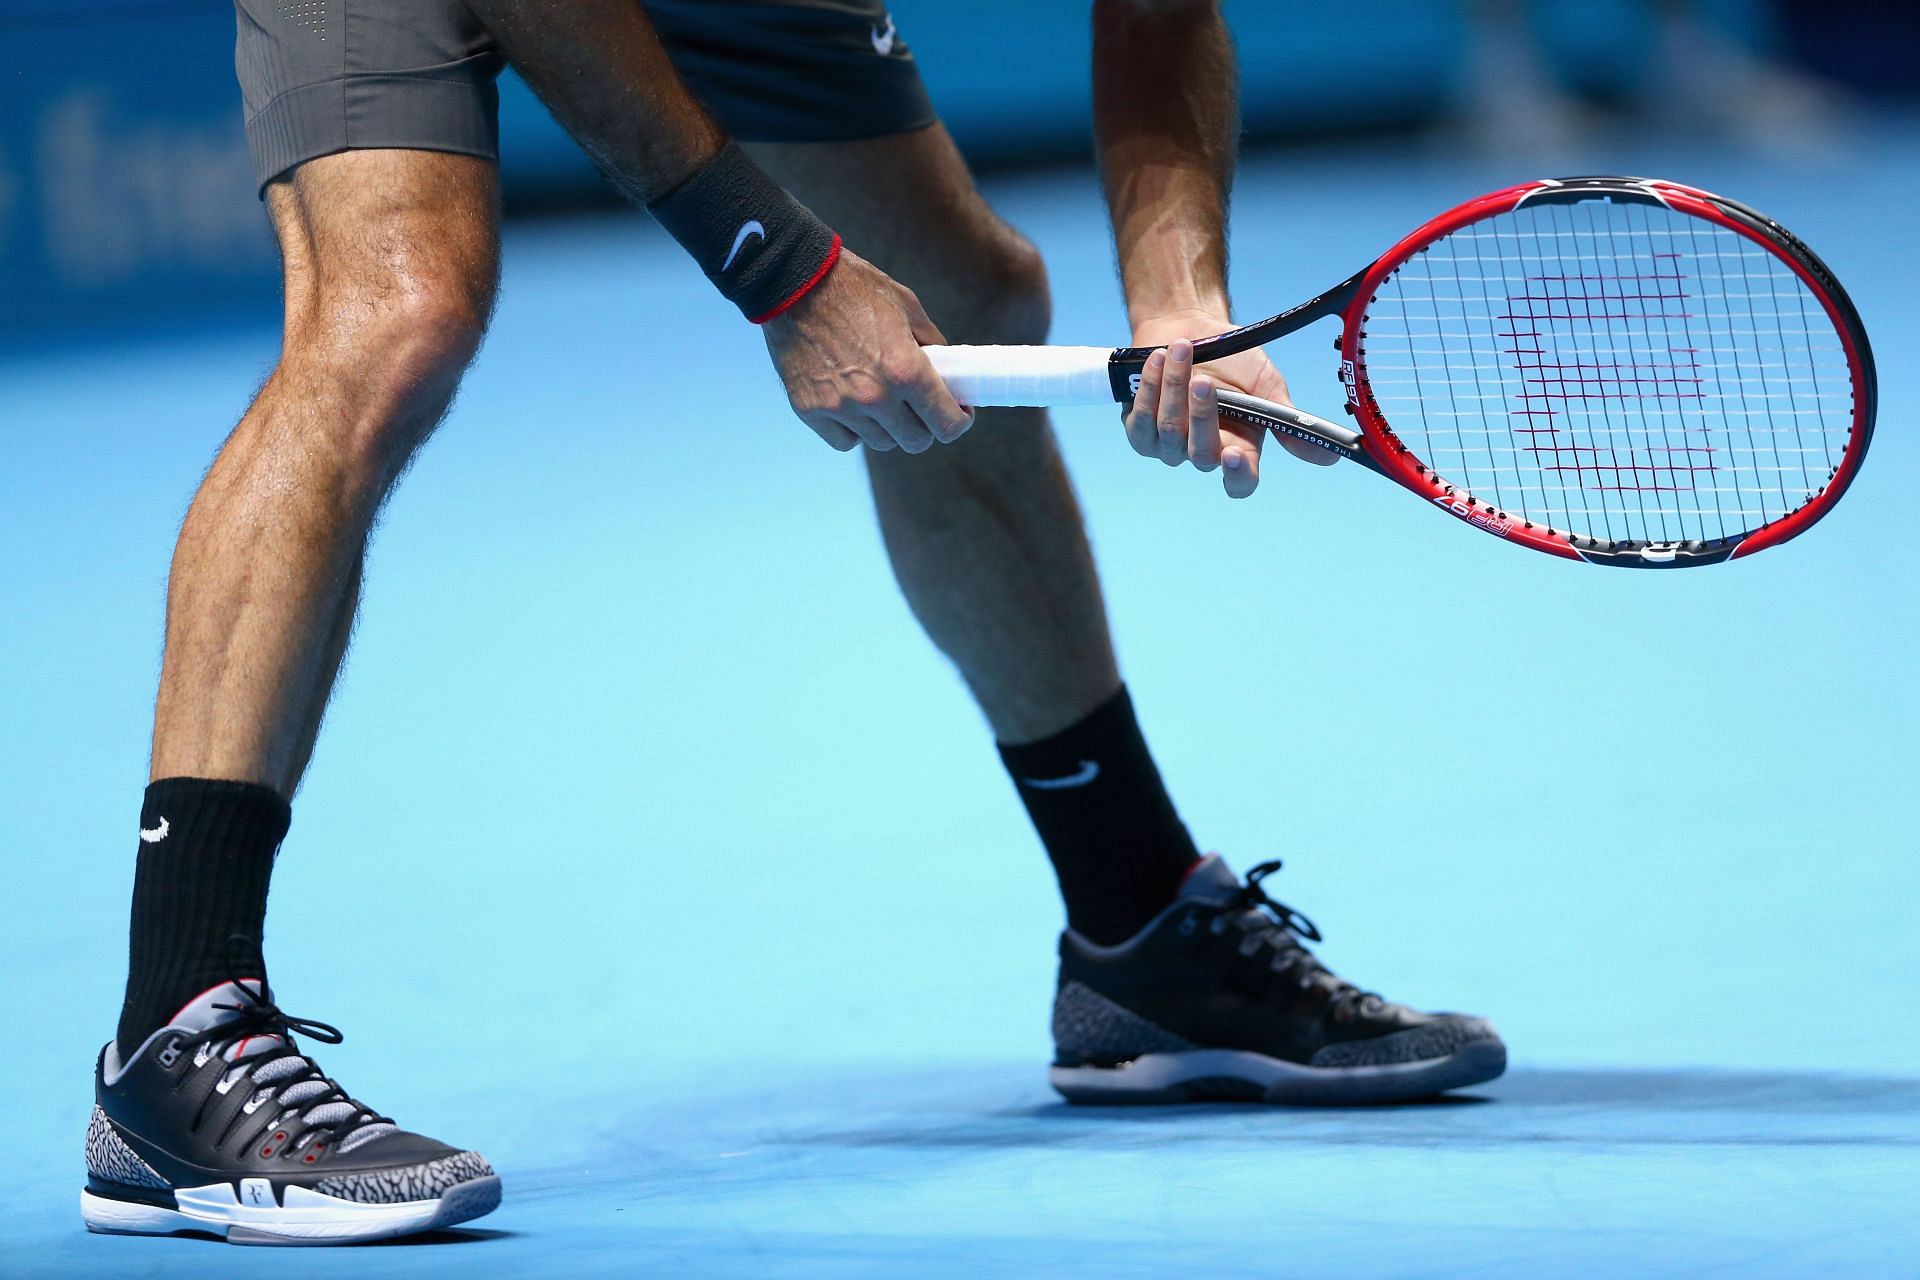 Federer at the Barclays ATP World Tour Finals - Day One